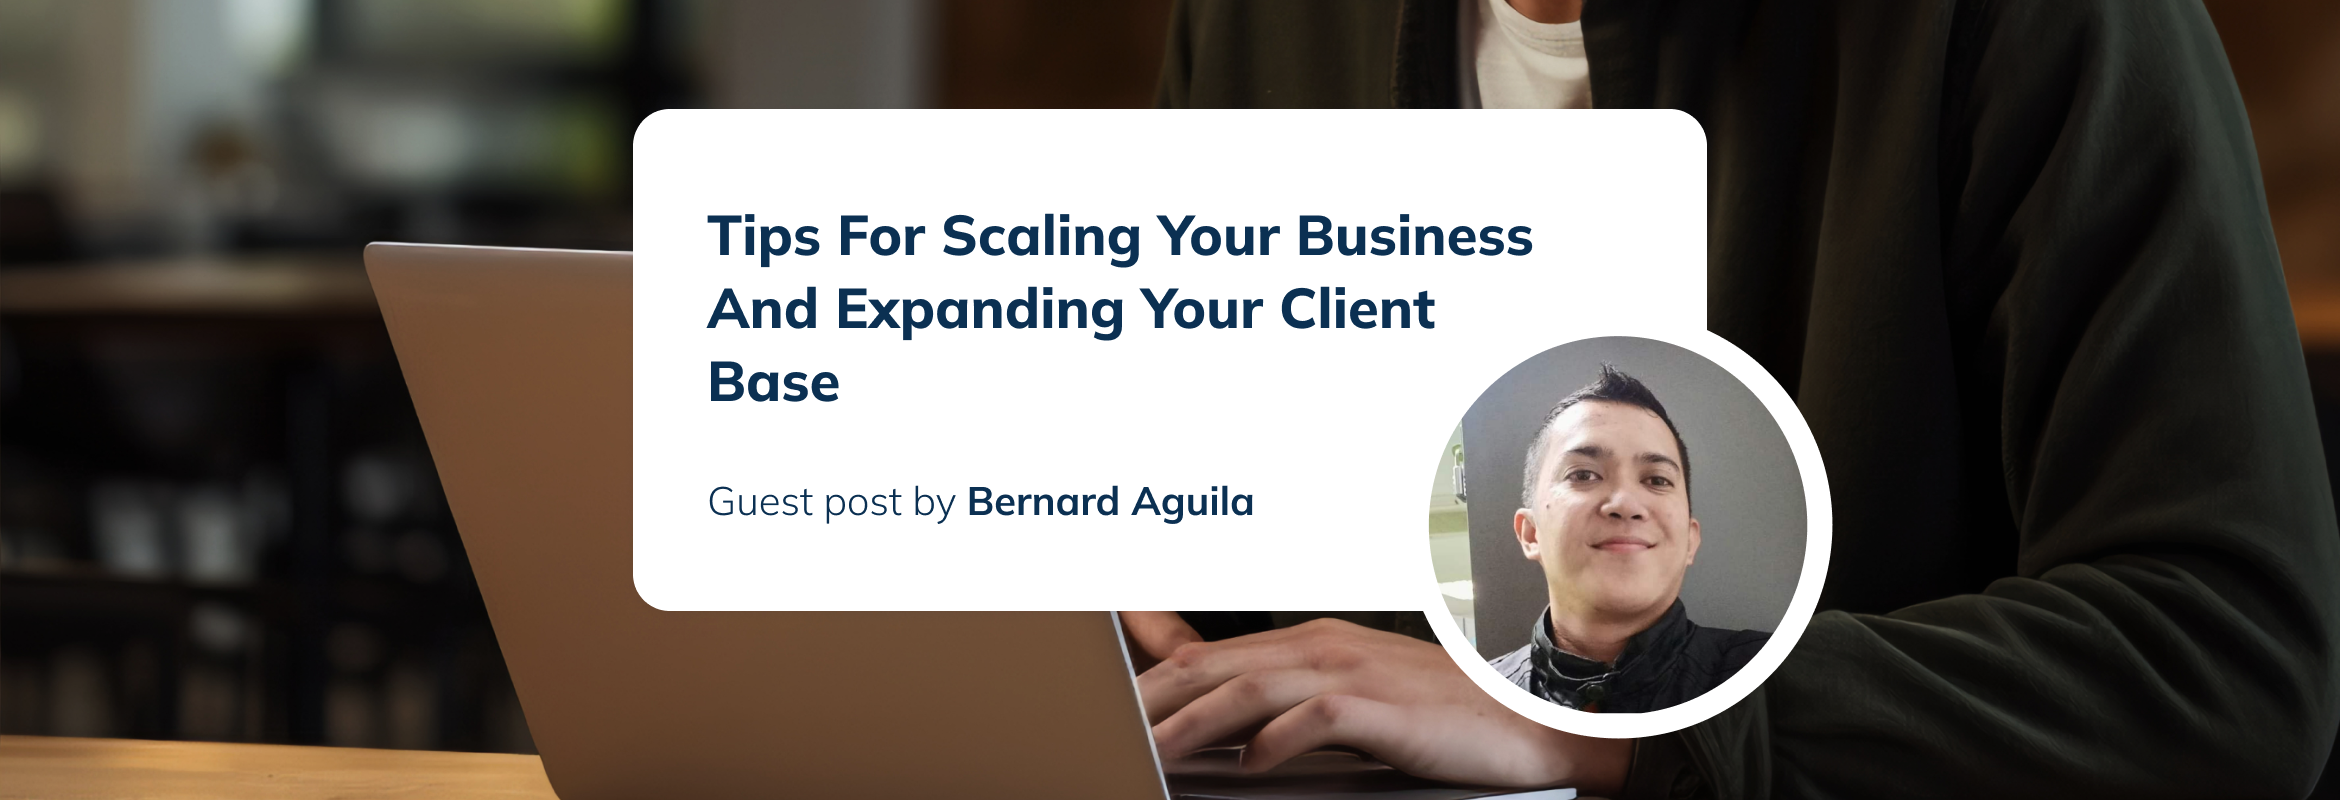 Tips For Scaling Your Business And Expanding Your Client Base